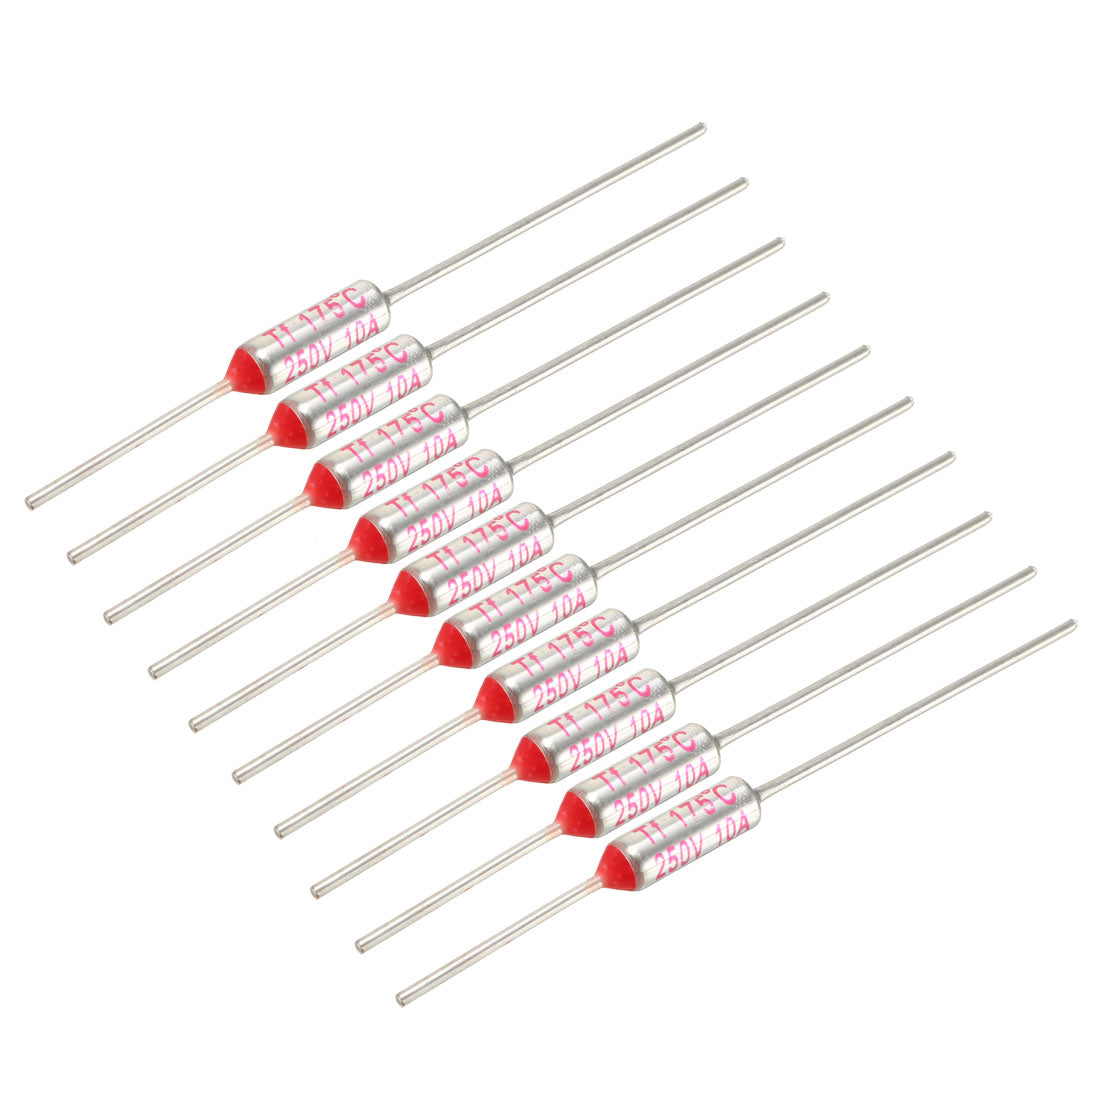 uxcell Uxcell 10 pcs Axial Leads Metal 175 Celsius Temperature Thermal Fuses